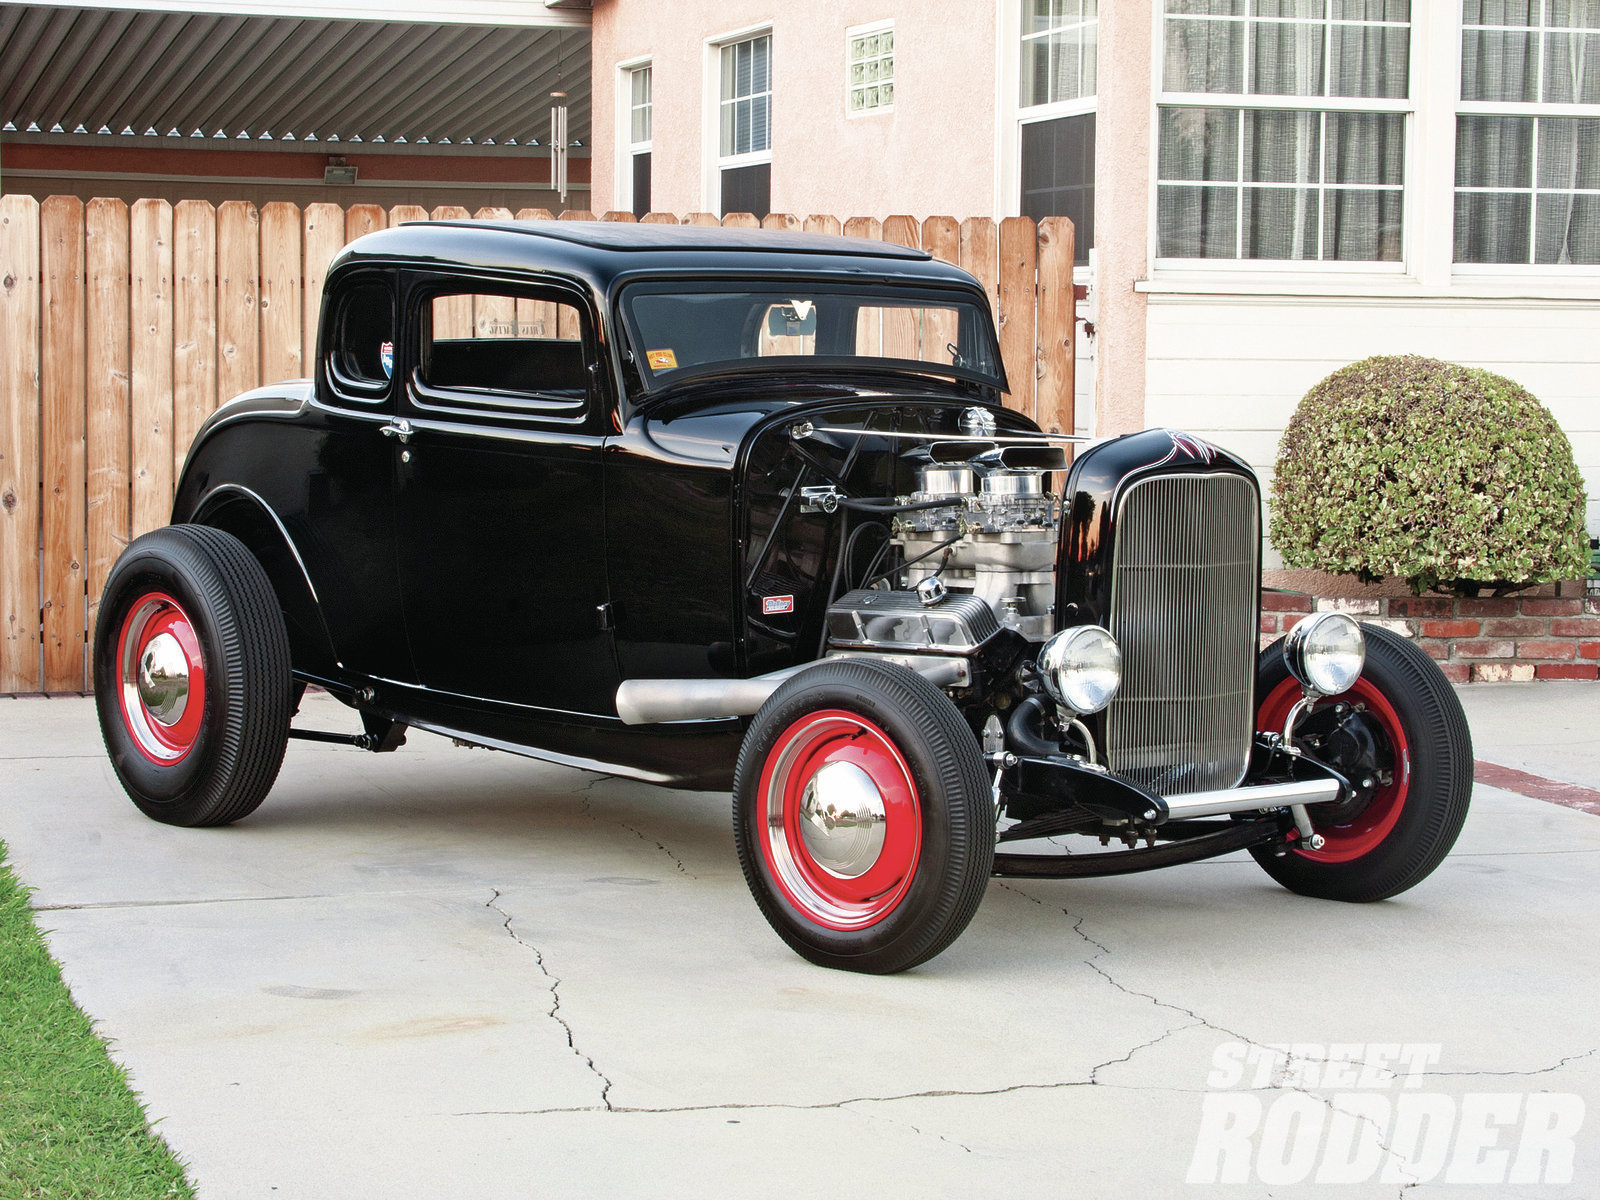 1303sr-01-black-1932-ford-five-window-coupe-front-right-view.jpg